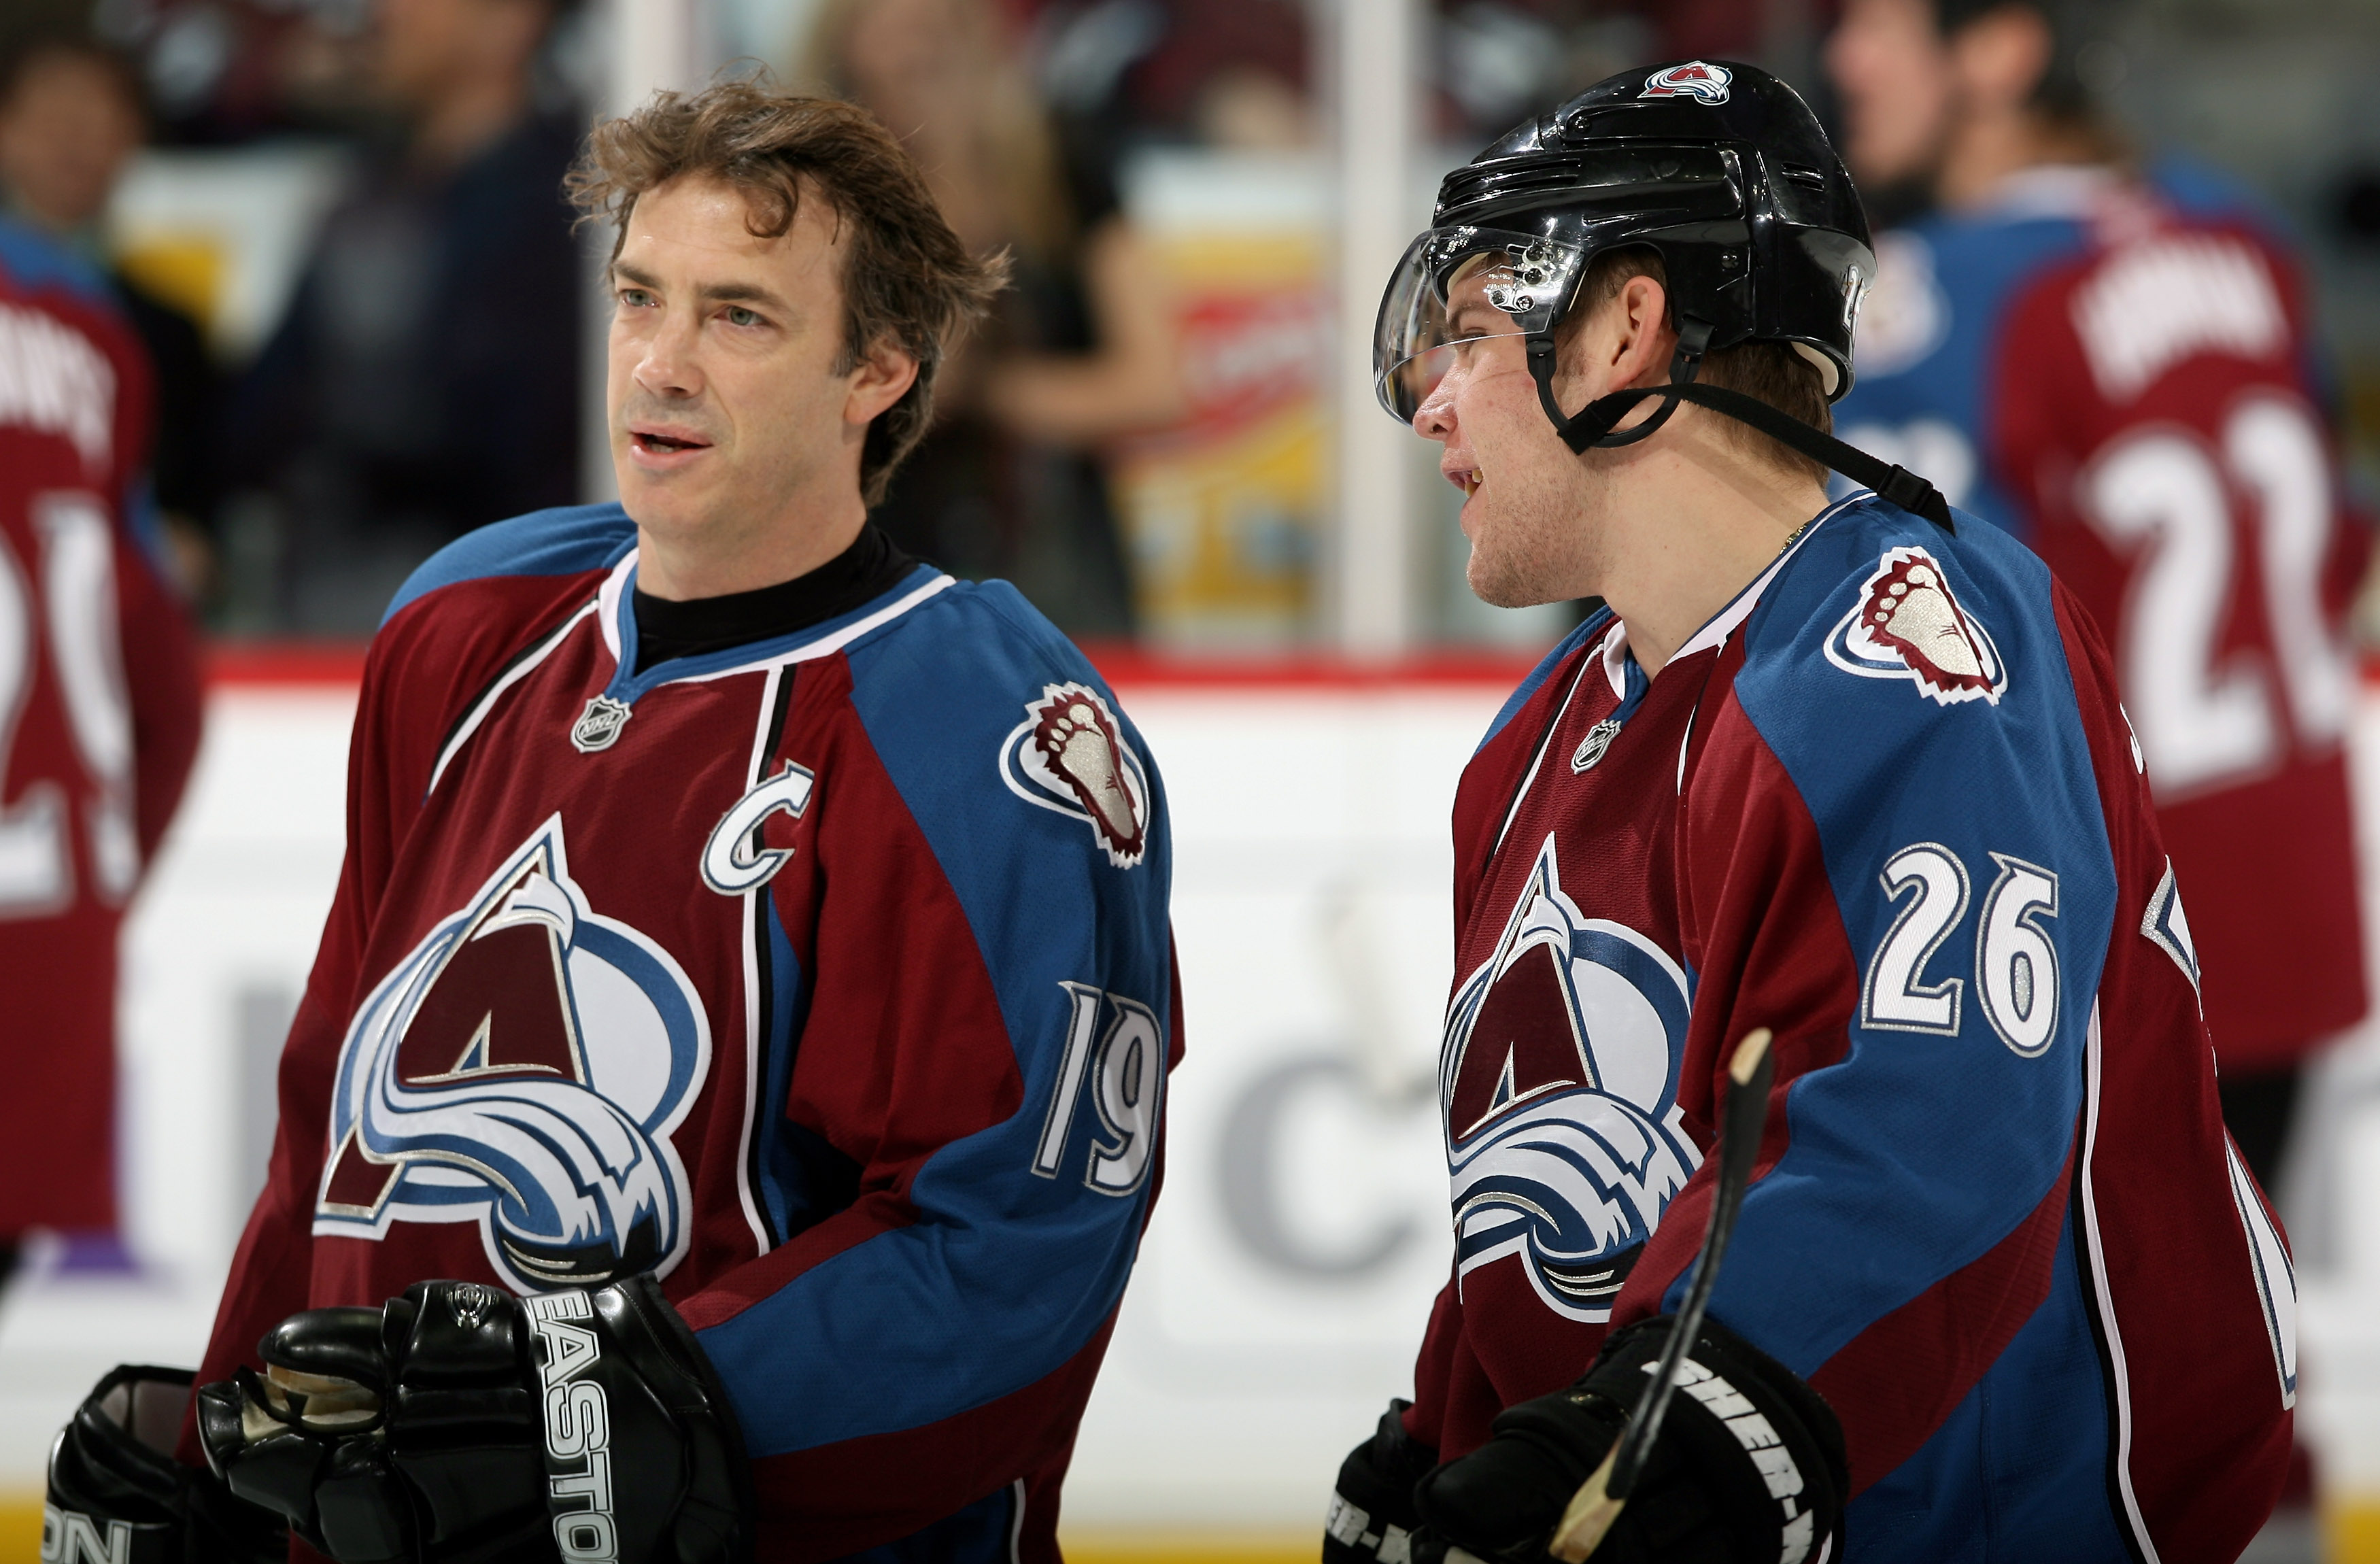 Colorado Avalanche: Who Should the Avalanche Play While Wearing the  Nordiques Uniforms?